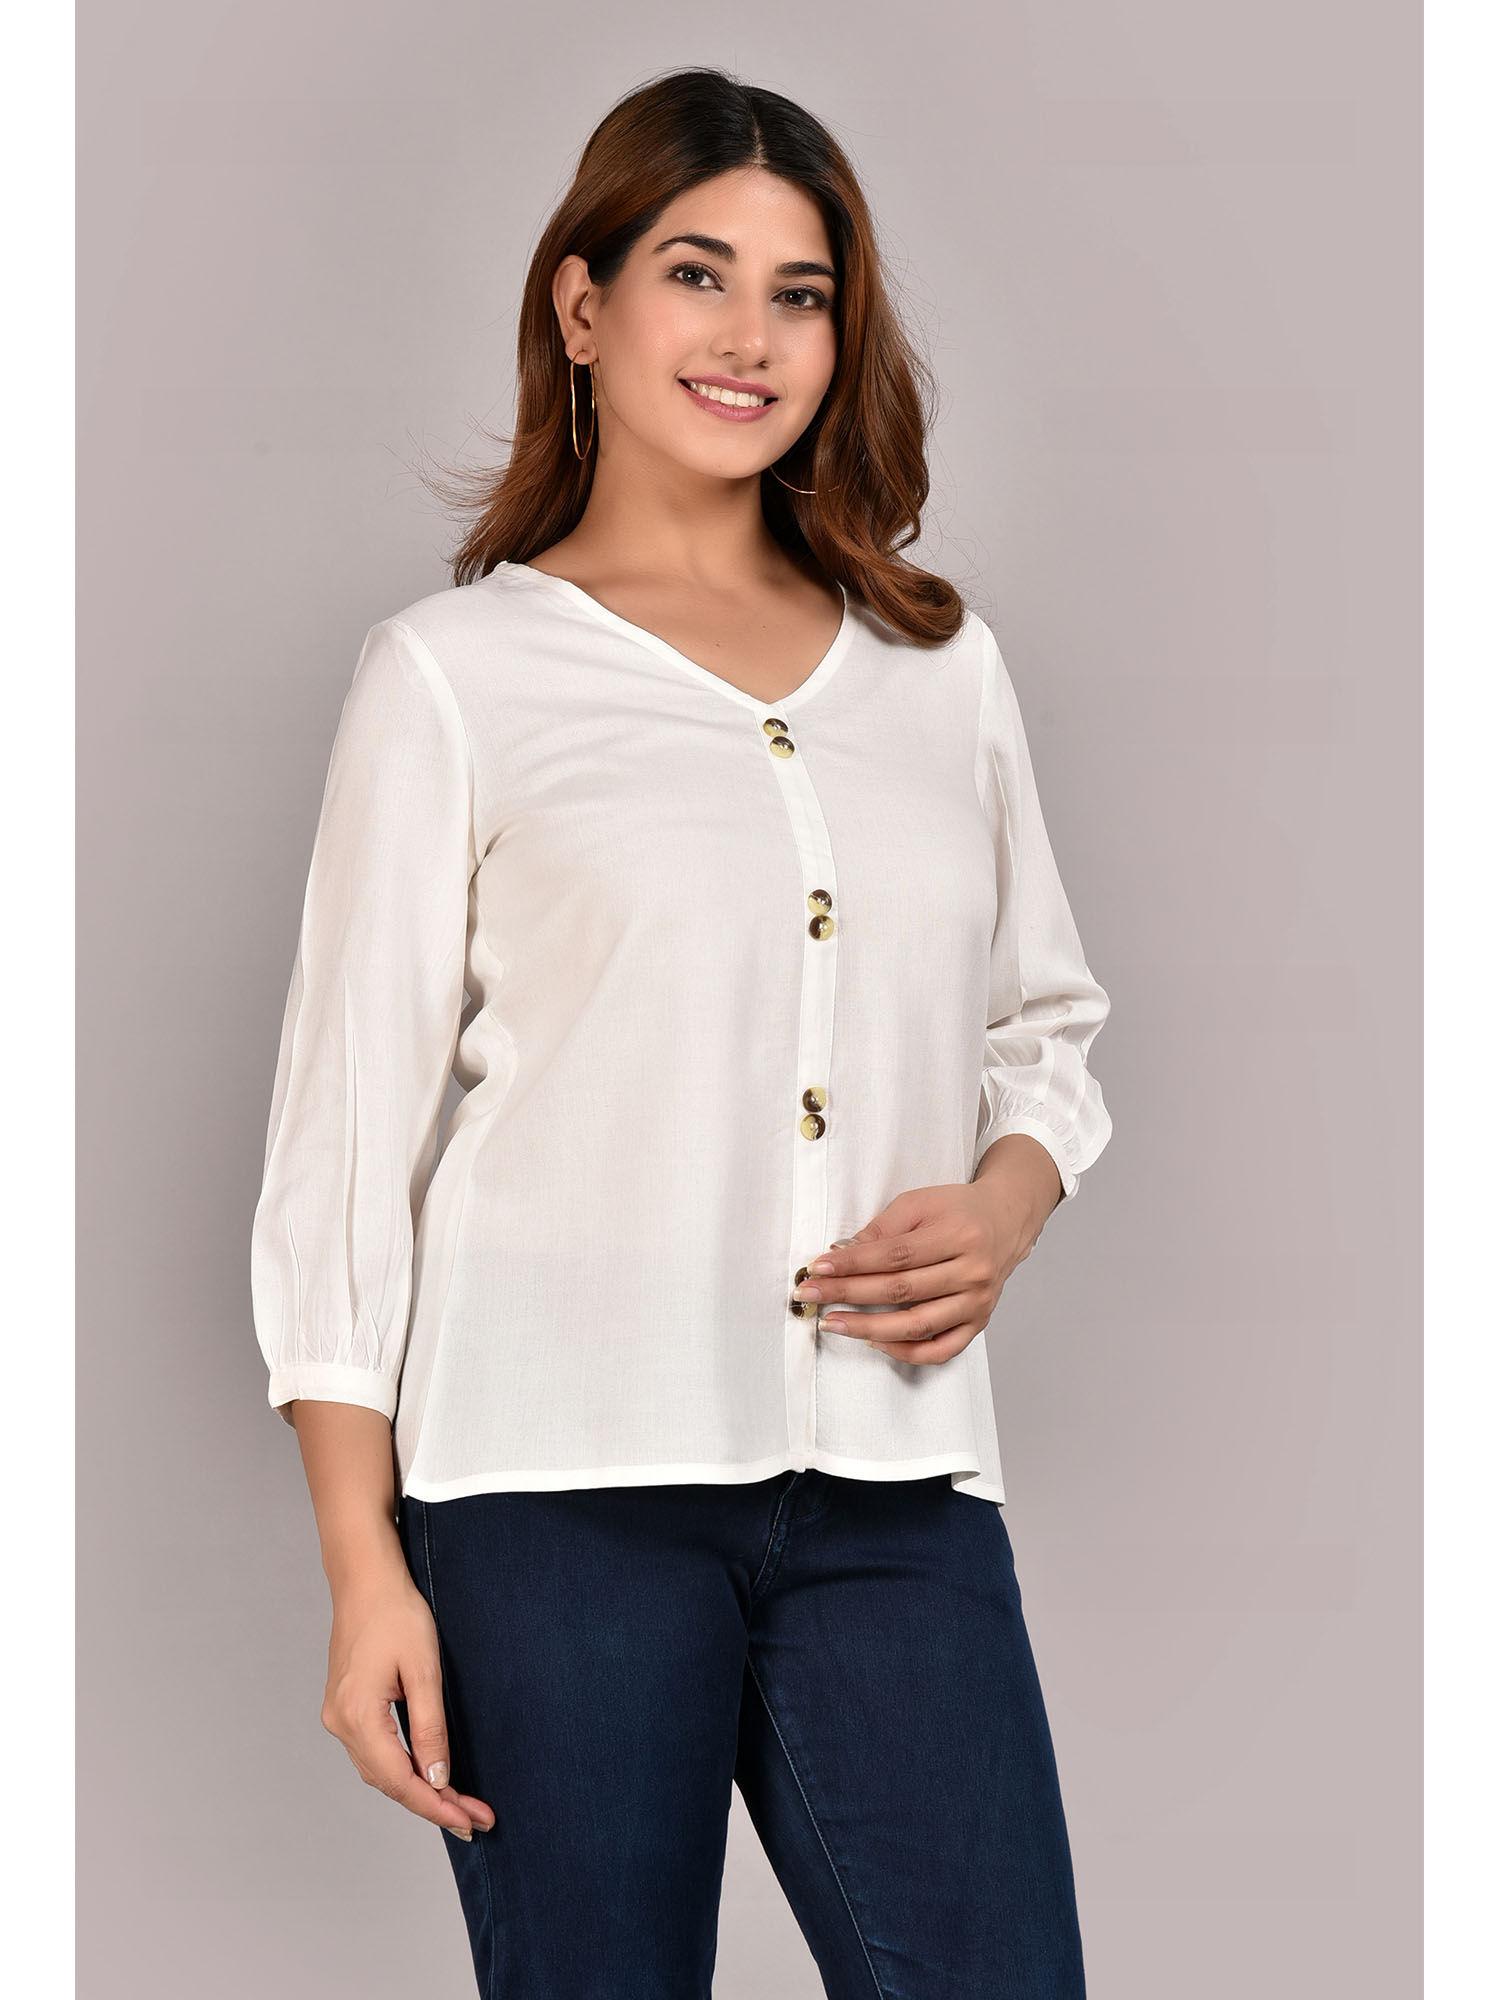 casual regular sleeves solid women white top